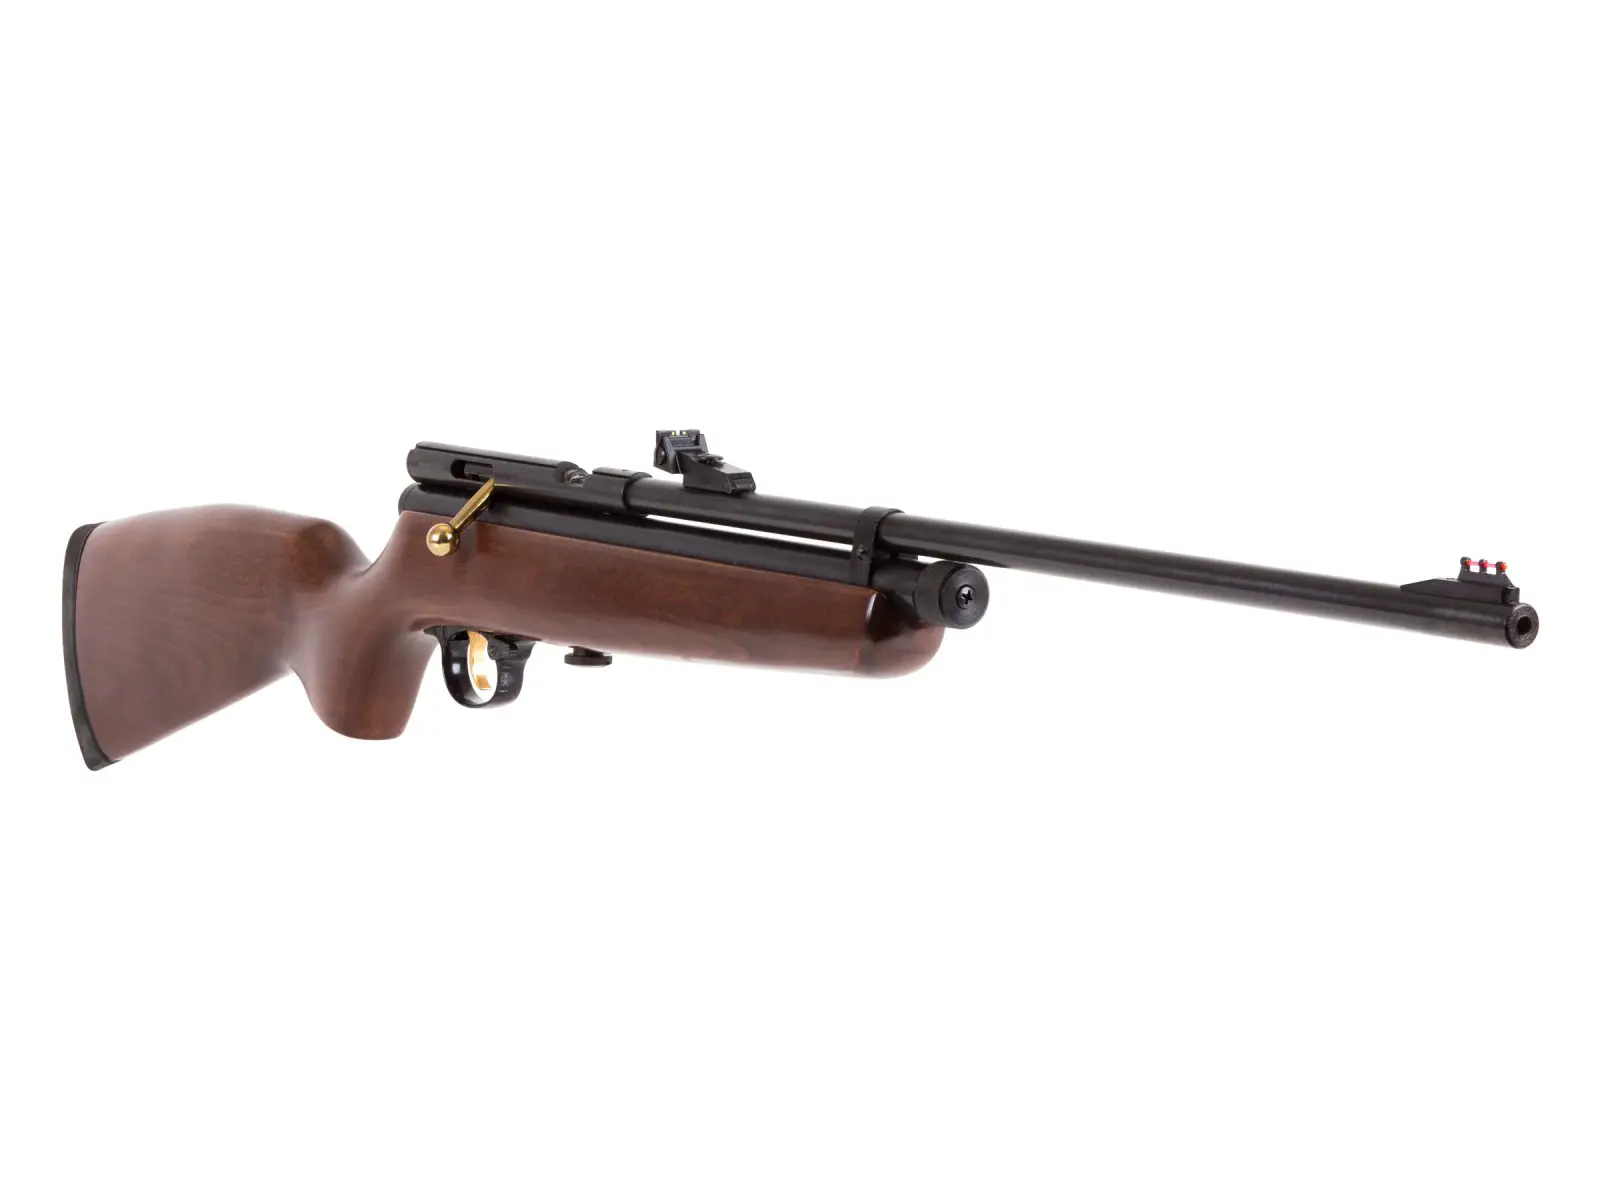 qb78 Best CO2 air rifles 2022 - Top 5 fantastic guns for the money (Reviews and Buying Guide)